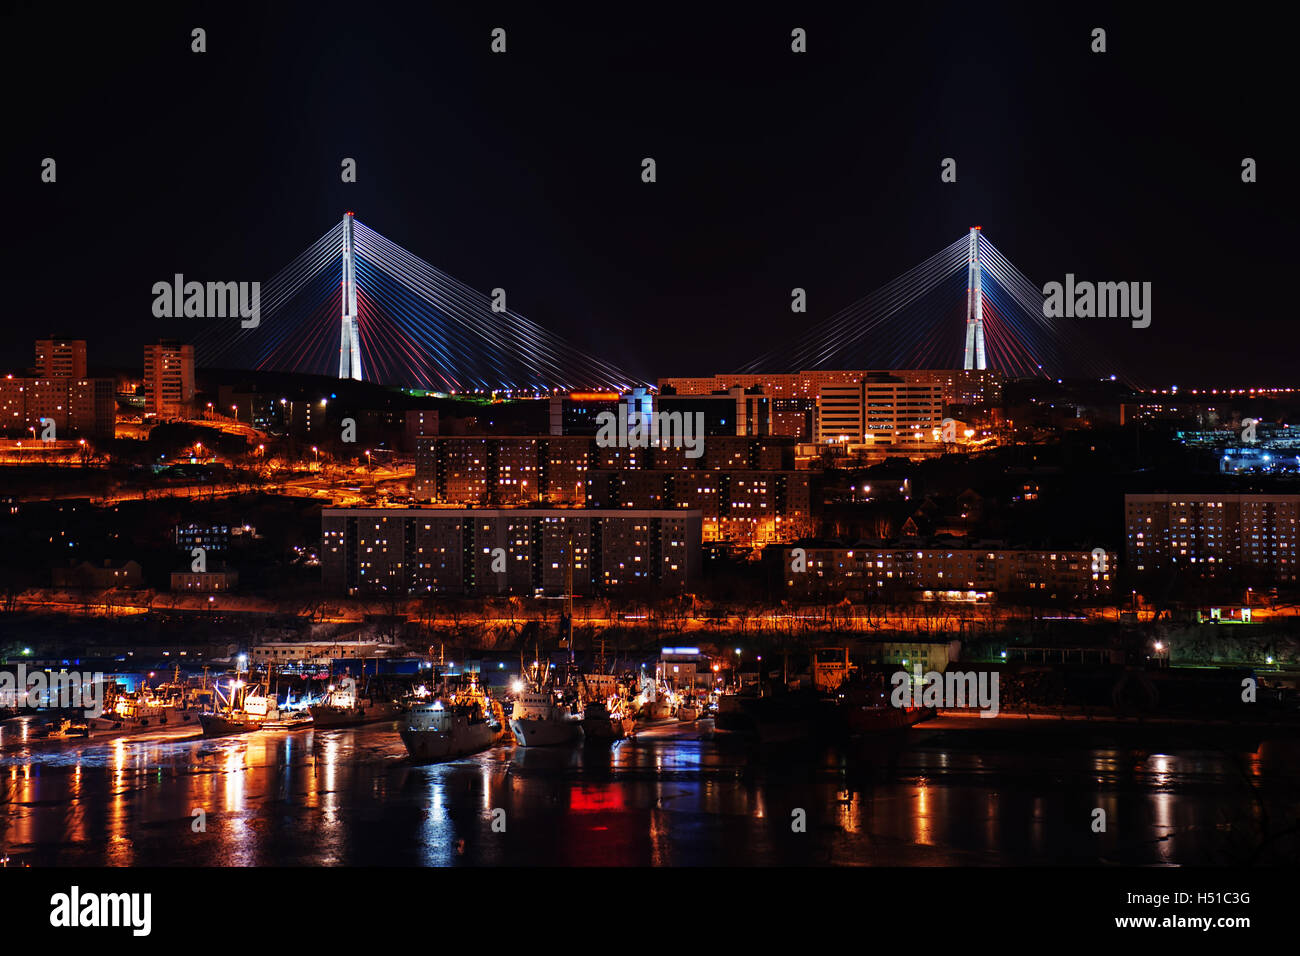 night view of the longest cable-stayed bridge in the world in the Russian Vladivostok over the Eastern Bosphorus strait to the R Stock Photo